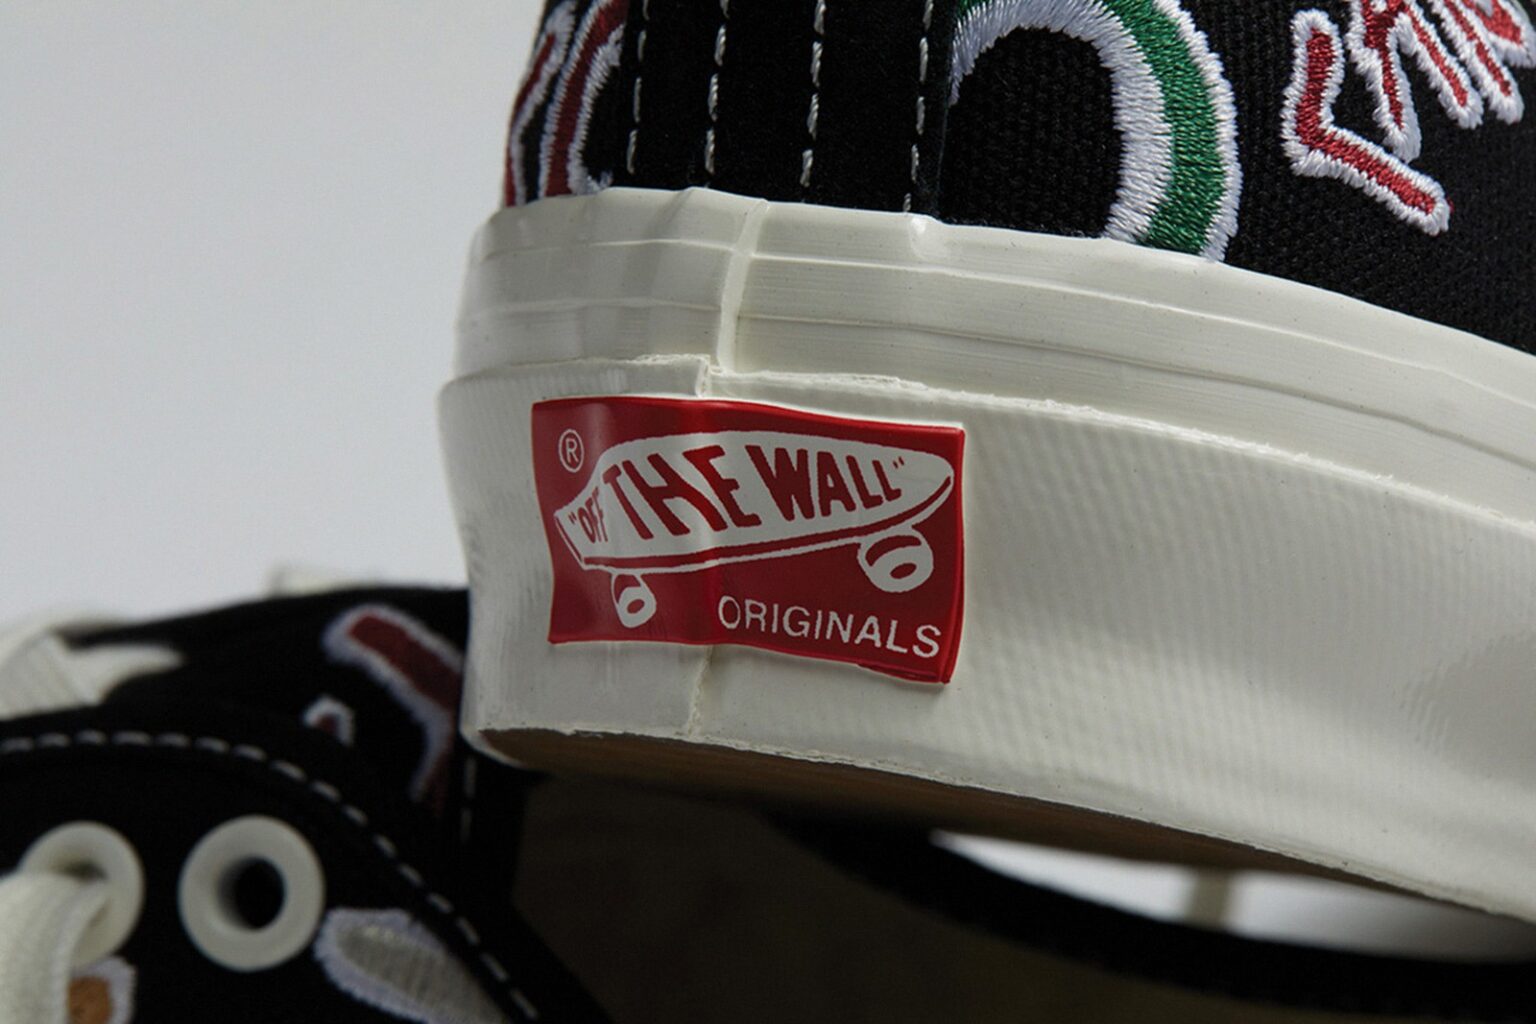 vans-og-authentic-lx-zodiac-release-date-price-05-1536x1024